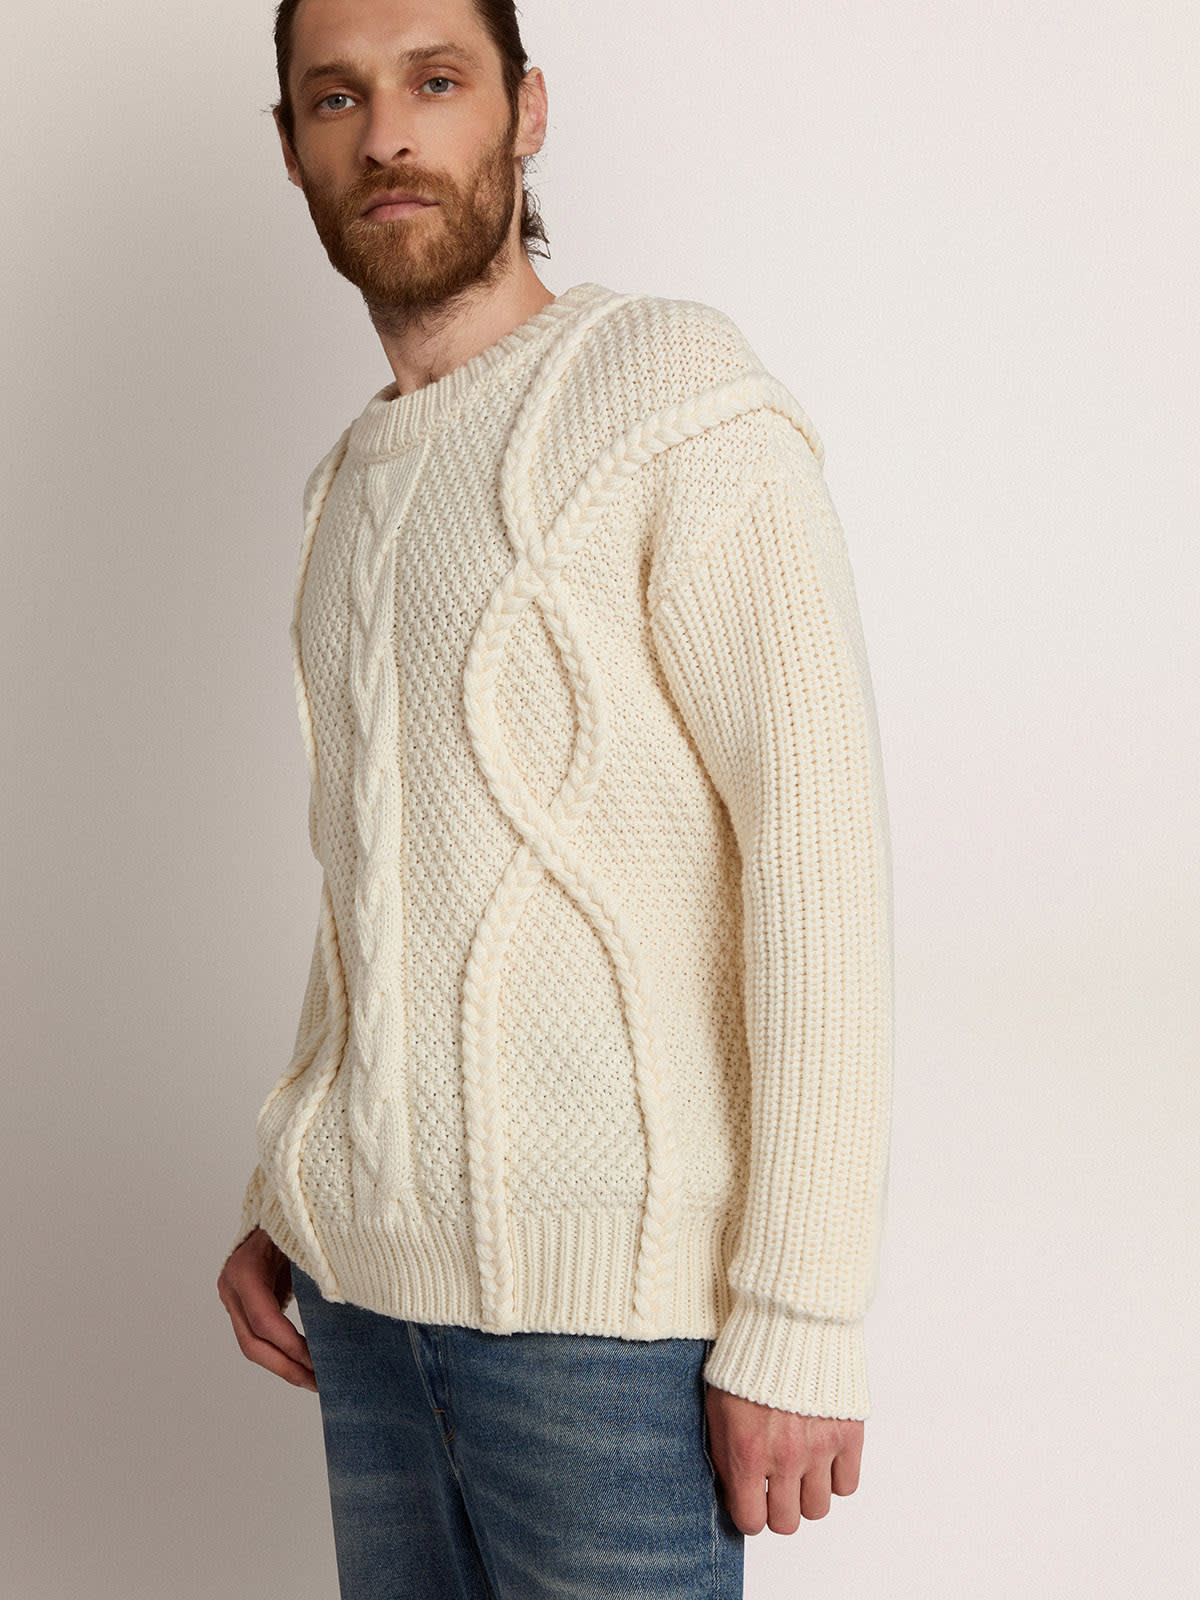 Golden Goose - Men’s round-neck sweater in wool with braided motif in 